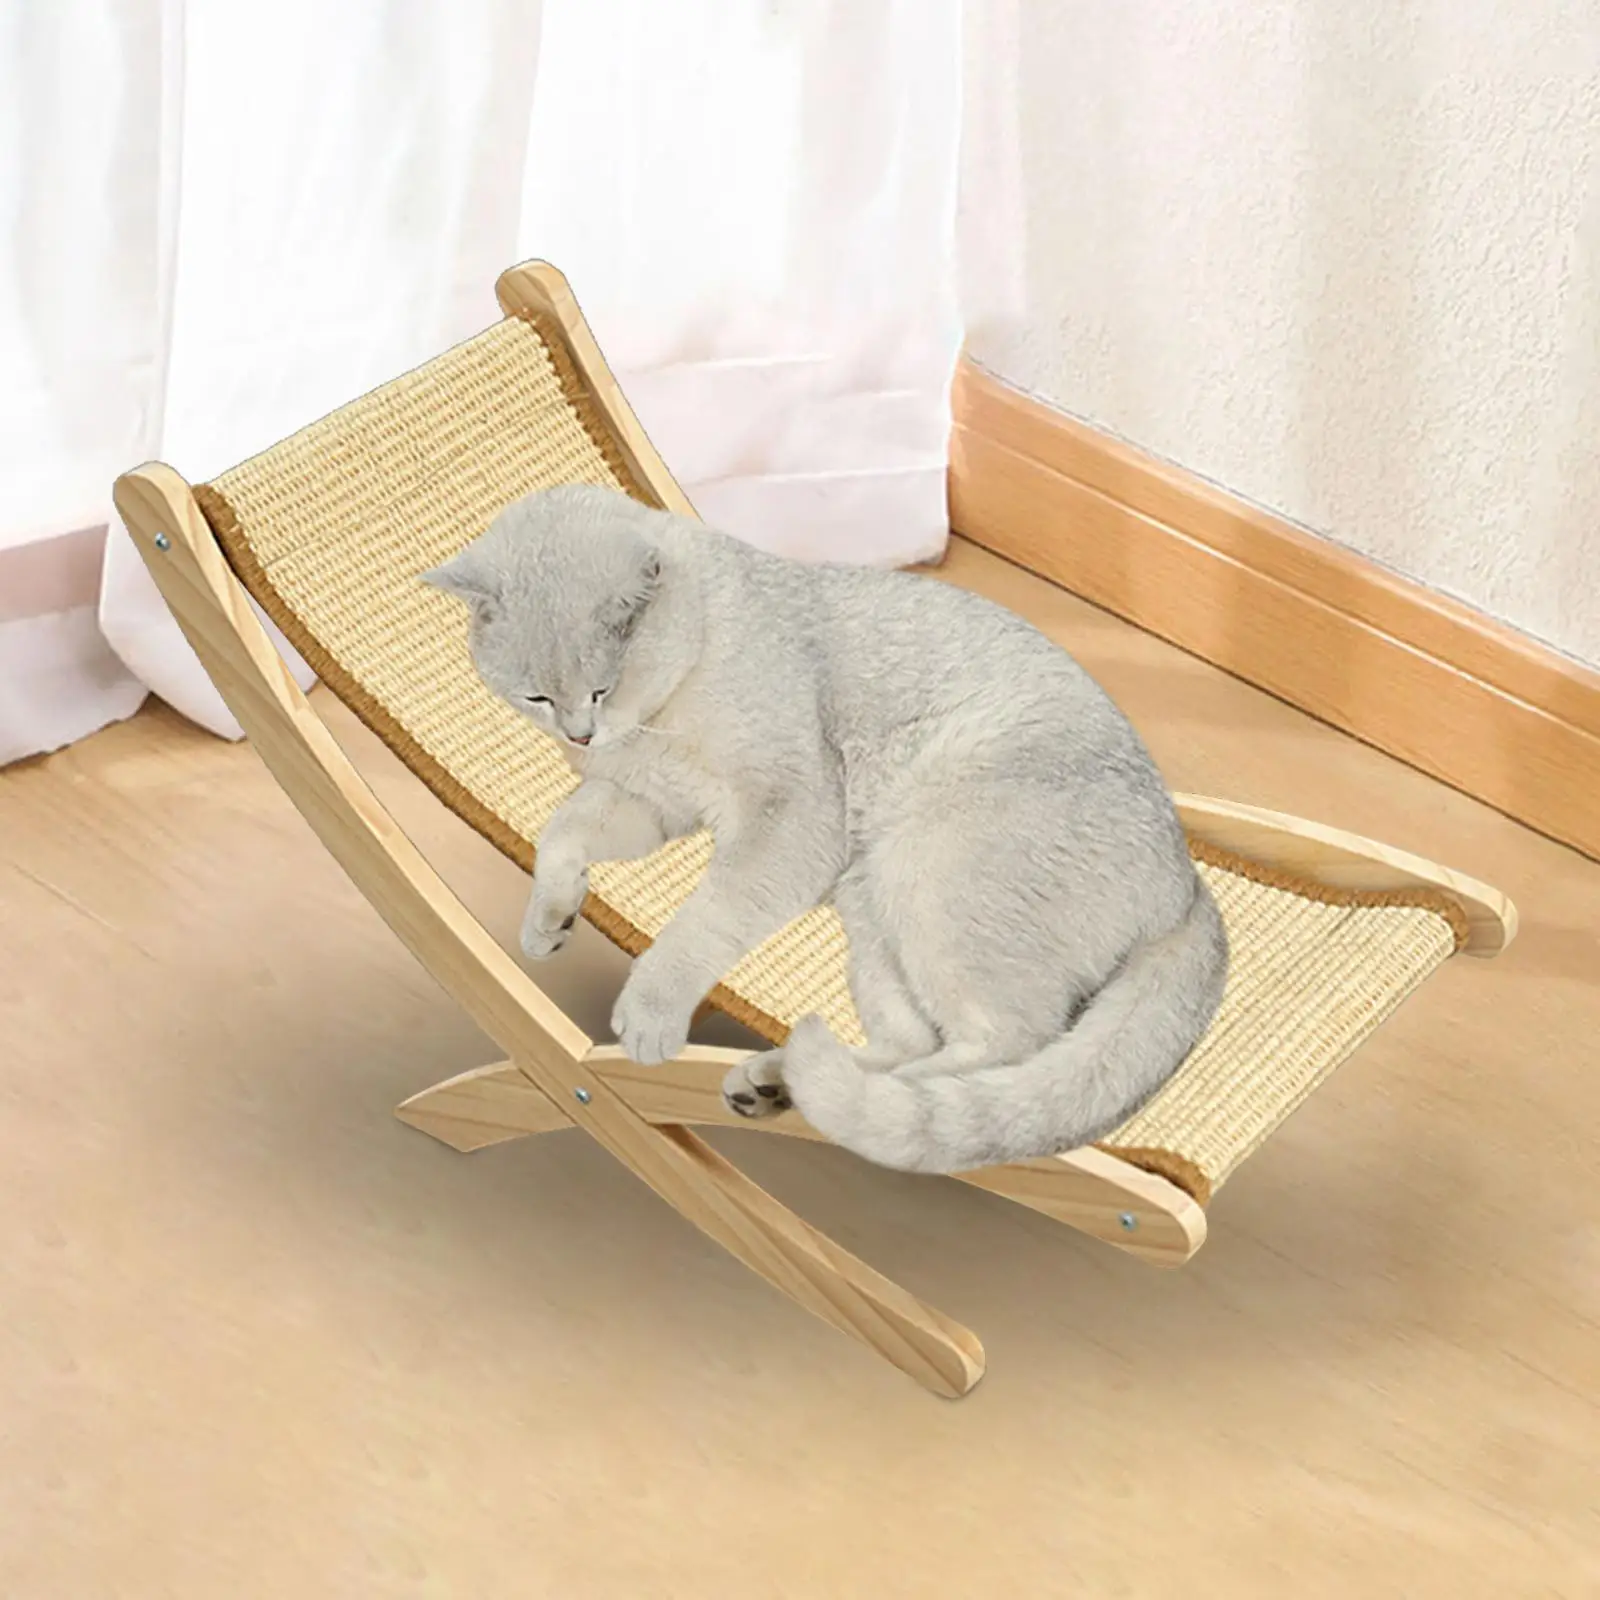 Cat Lounge Chair Wood Swing Chair Cats Elevated Bed Portable Rocking Chair Cat Hammock Couch for Small Animal Small Dogs Rabbit